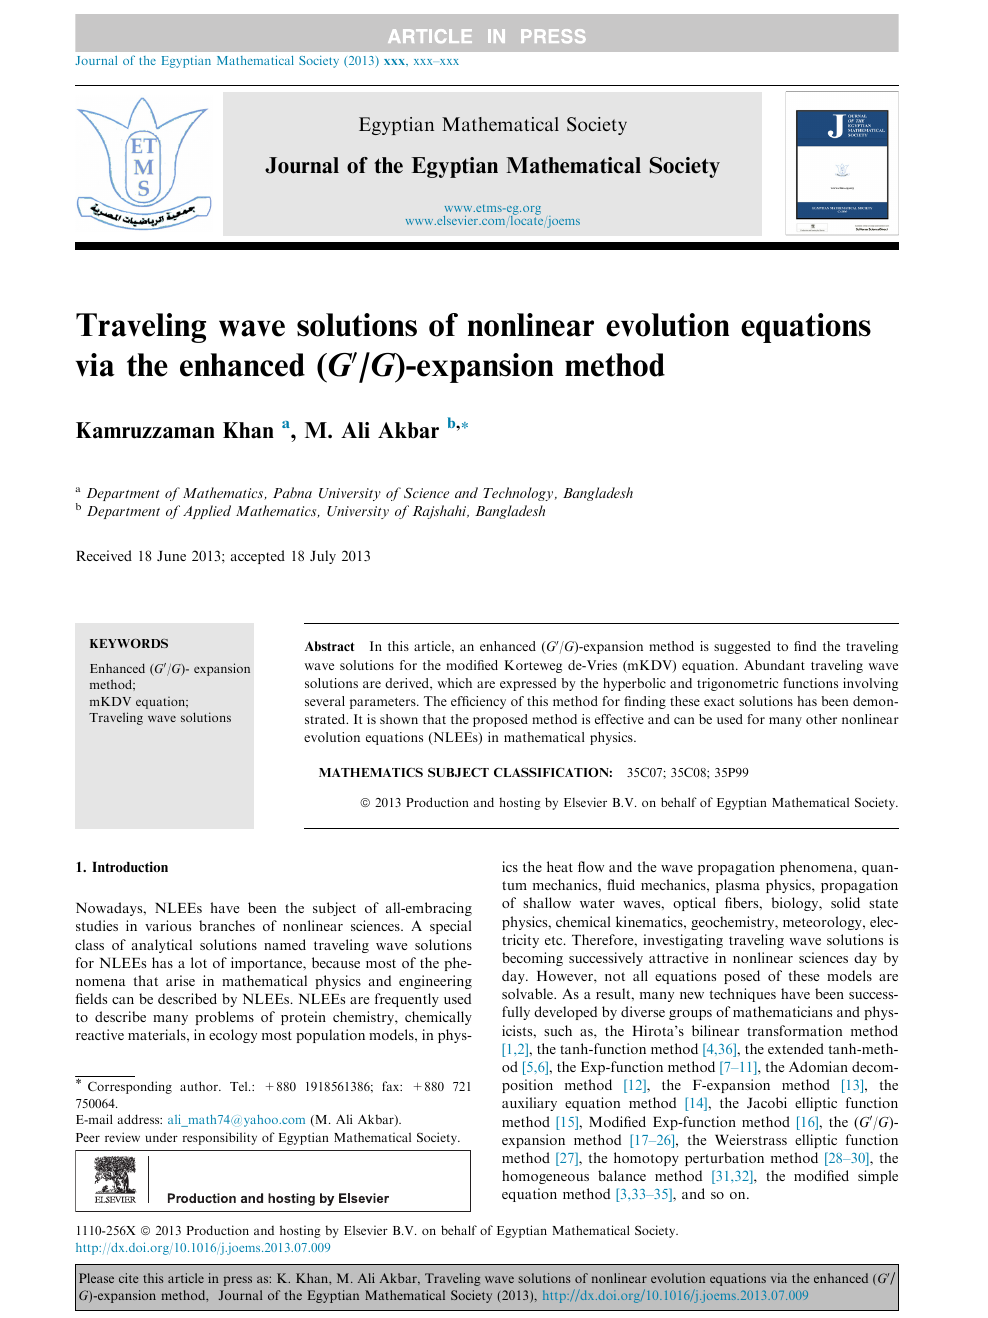 Traveling Wave Solutions Of Nonlinear Evolution Equations Via The Enhanced G G Expansion Method Topic Of Research Paper In Mathematics Download Scholarly Article Pdf And Read For Free On Cyberleninka Open Science Hub